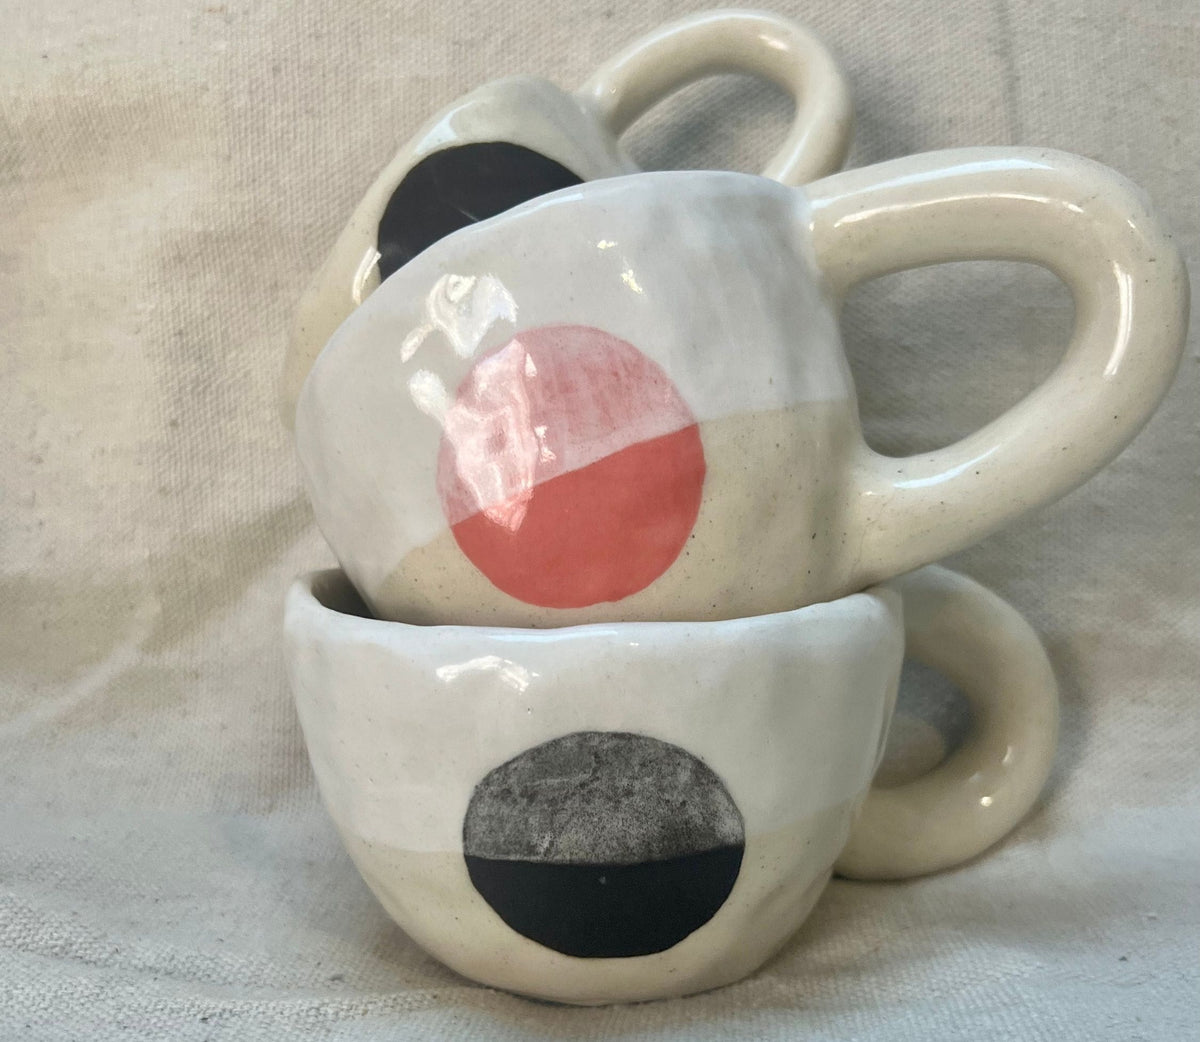 Coffee Tasting and Clay Mug Making Pottery Class — 1/21 + 2/25 (Time Out Market Boston)